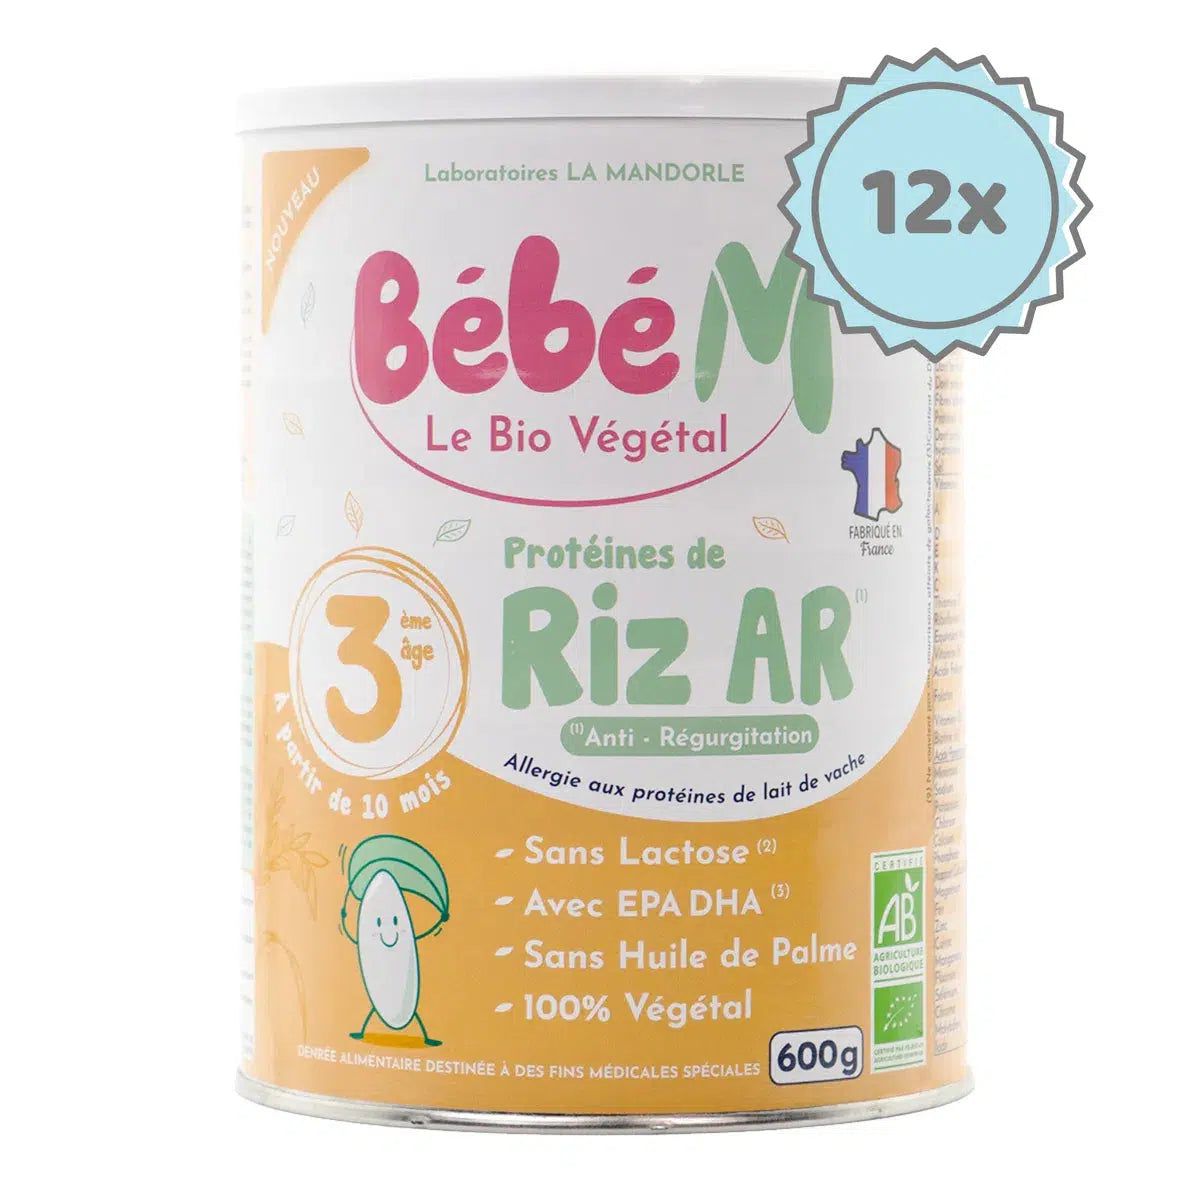 Le BEBE favortie snack container new 6+ months New